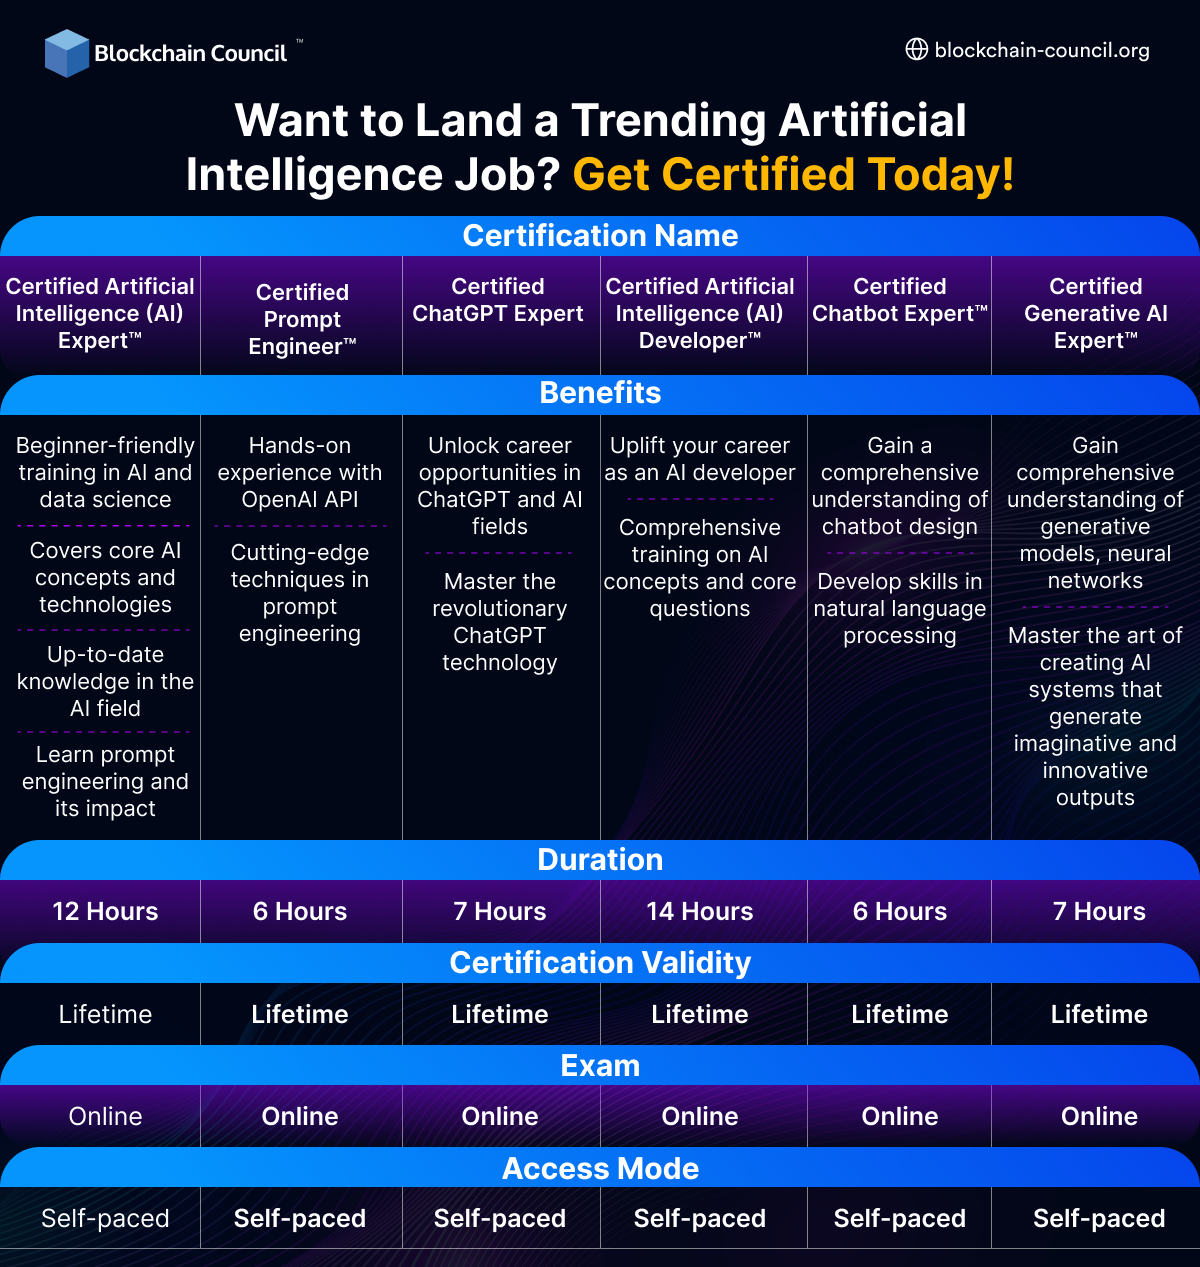 Want to Land a Trending Artificial Intelligence Job? Get Certified Today!